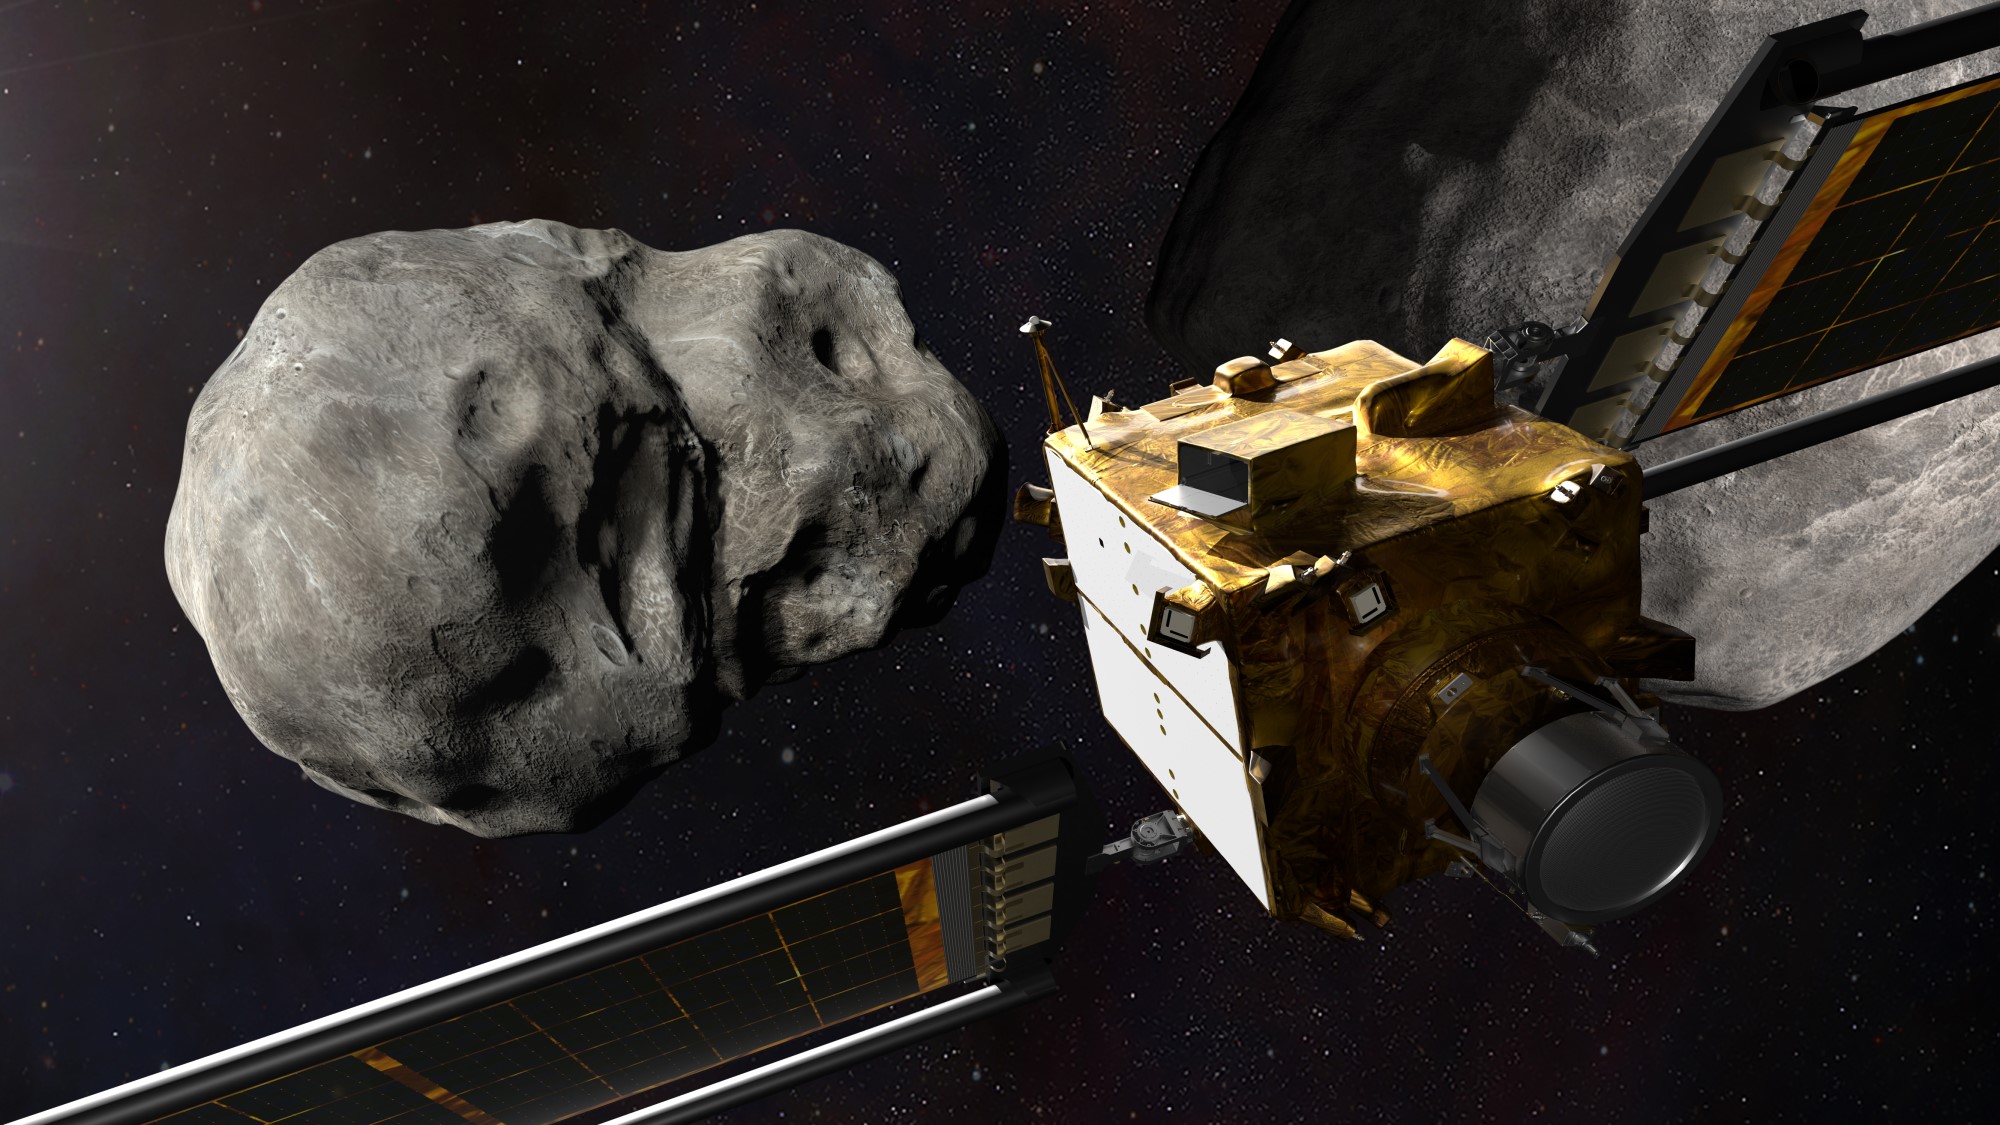 NASA's DART spacecraft will crash into an asteroid tonight in historic planetary defense test